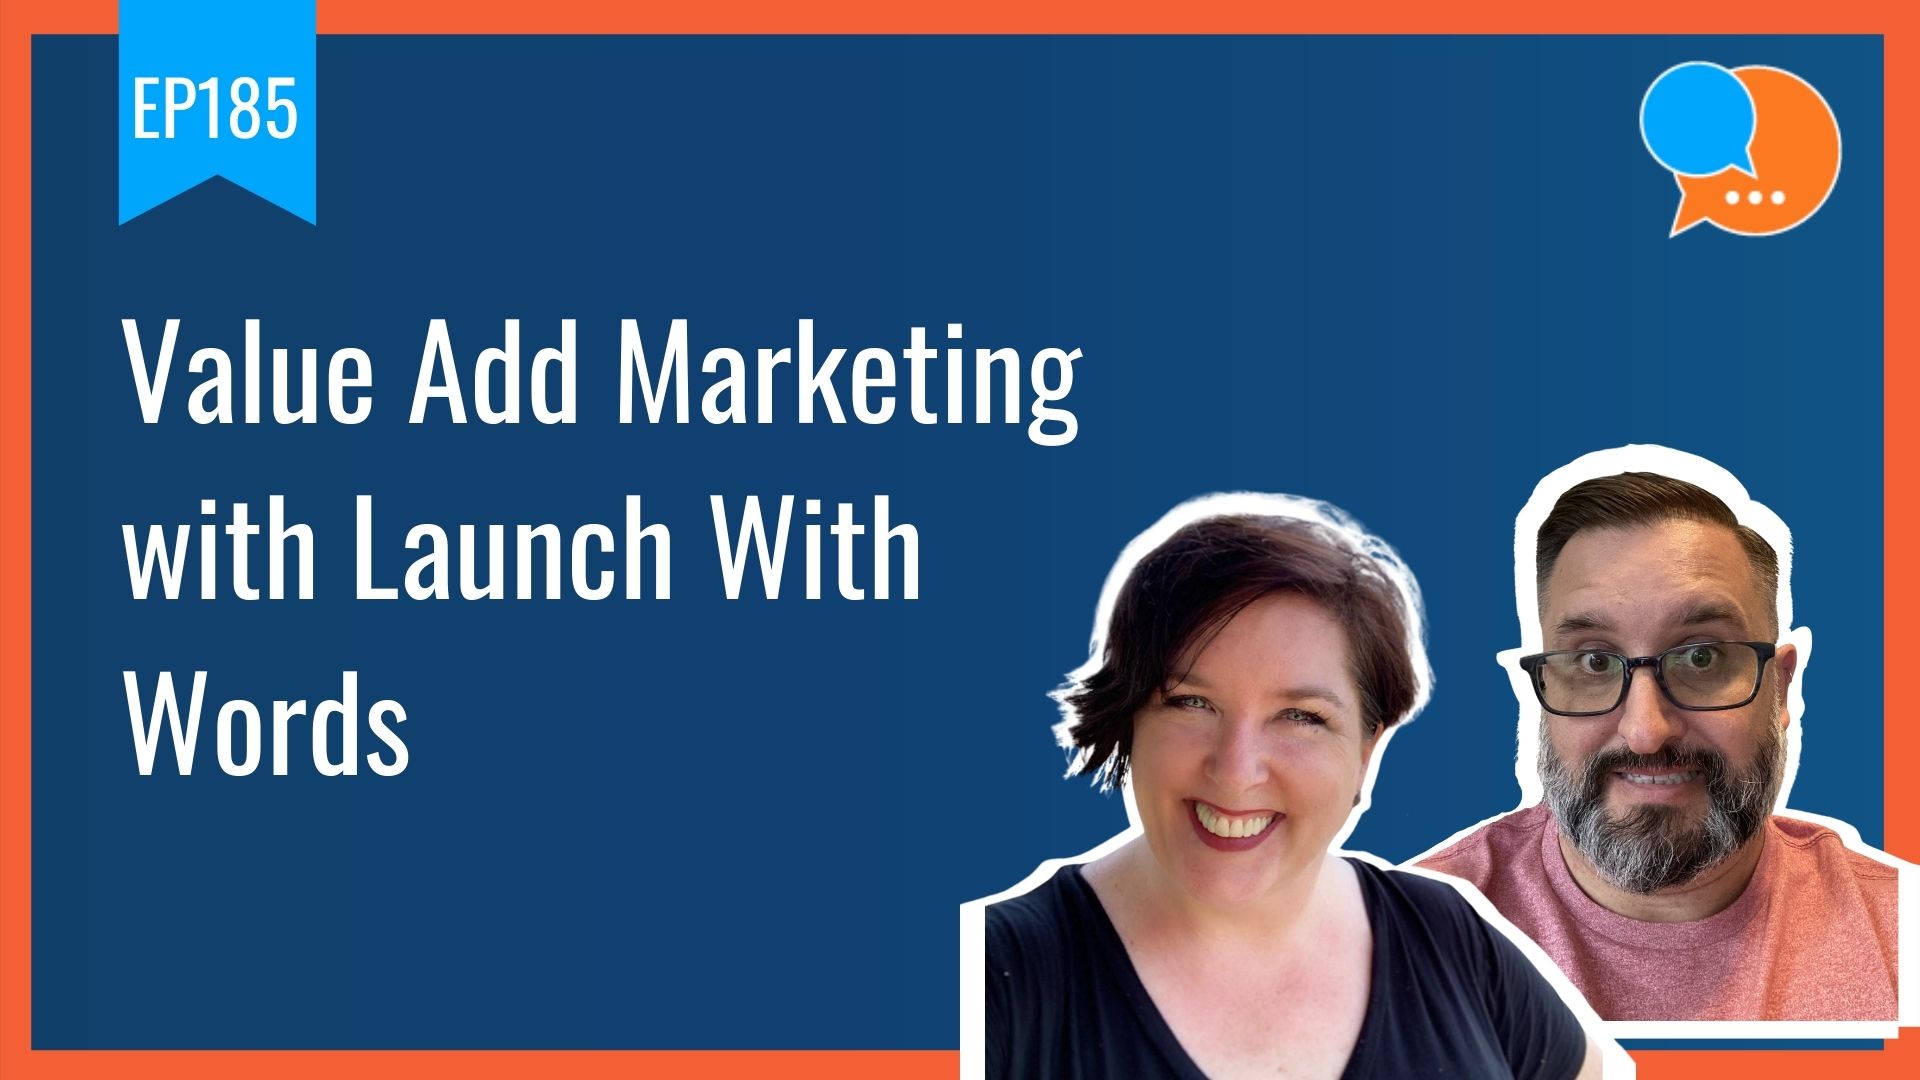 EP185 Value Add Marketing with Launch With Words Smart Marketing Show yt